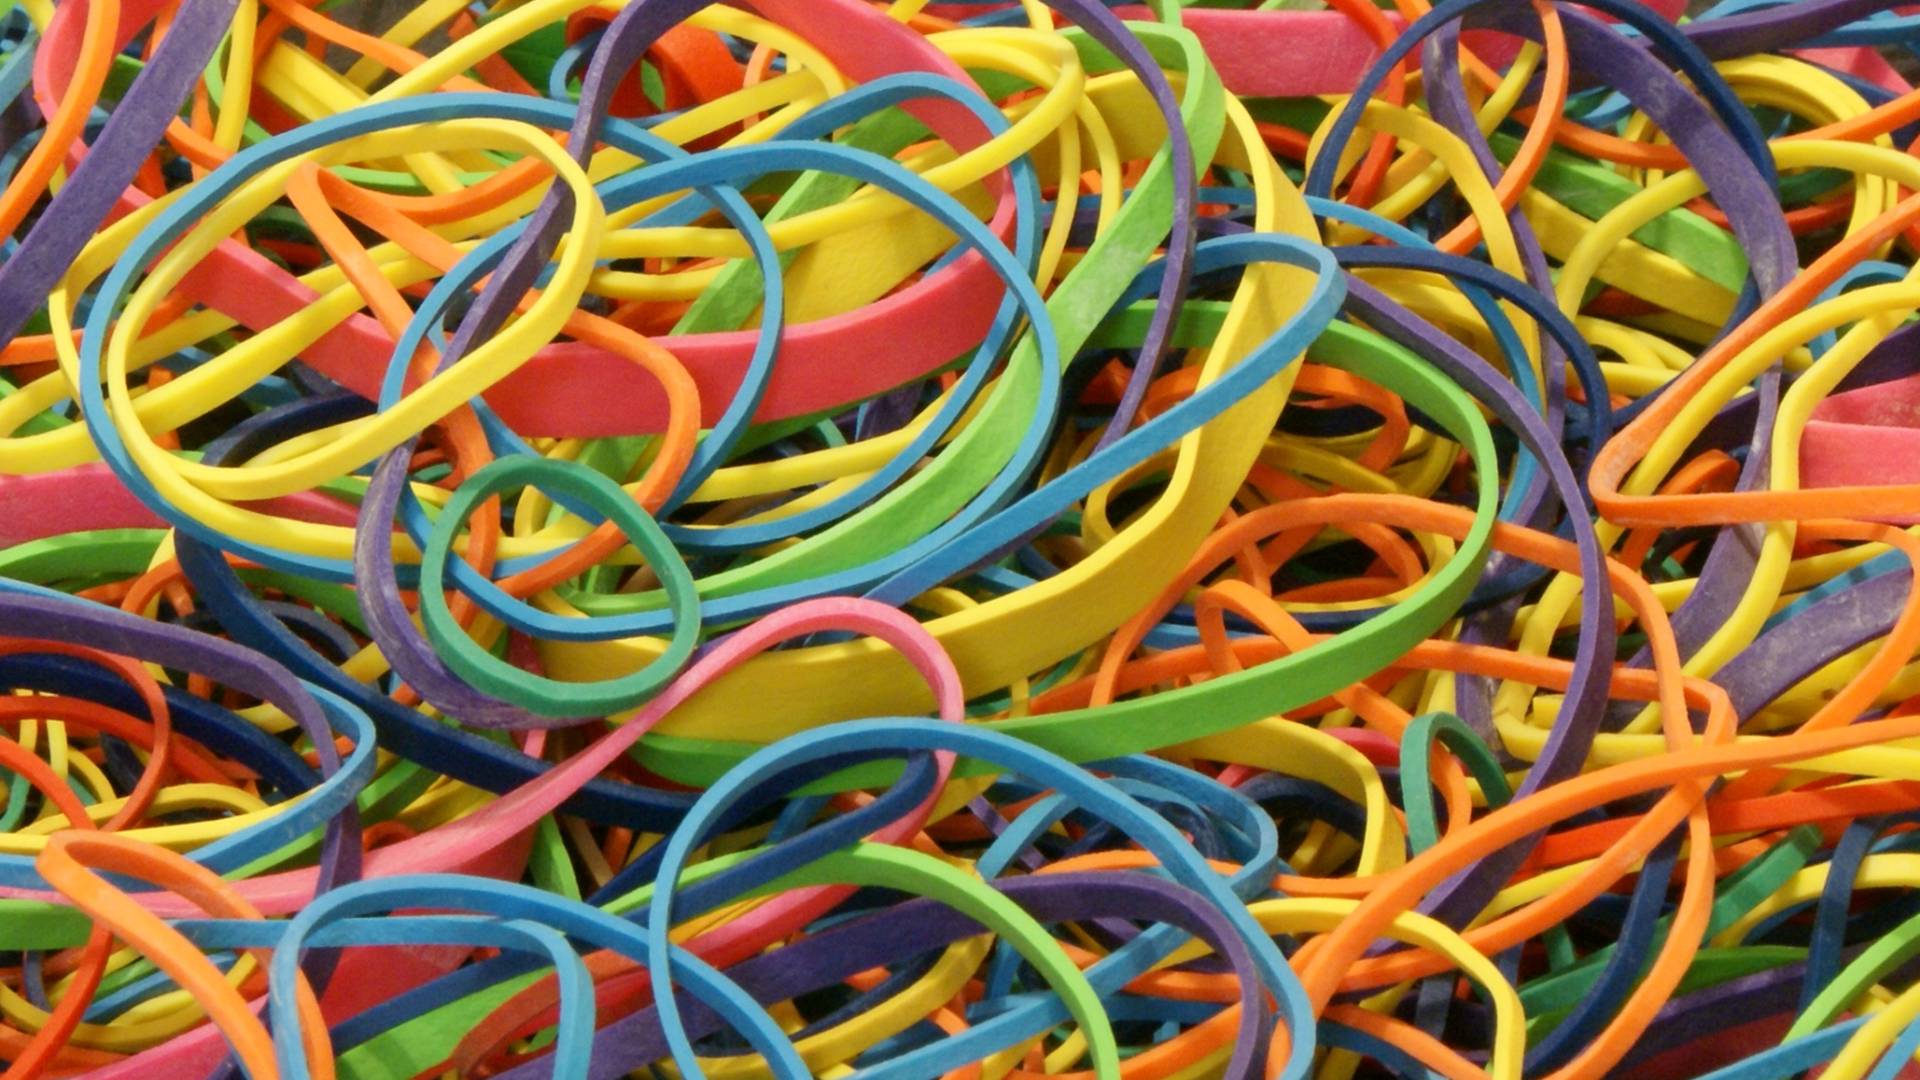 Pile of colorful rubbber bands